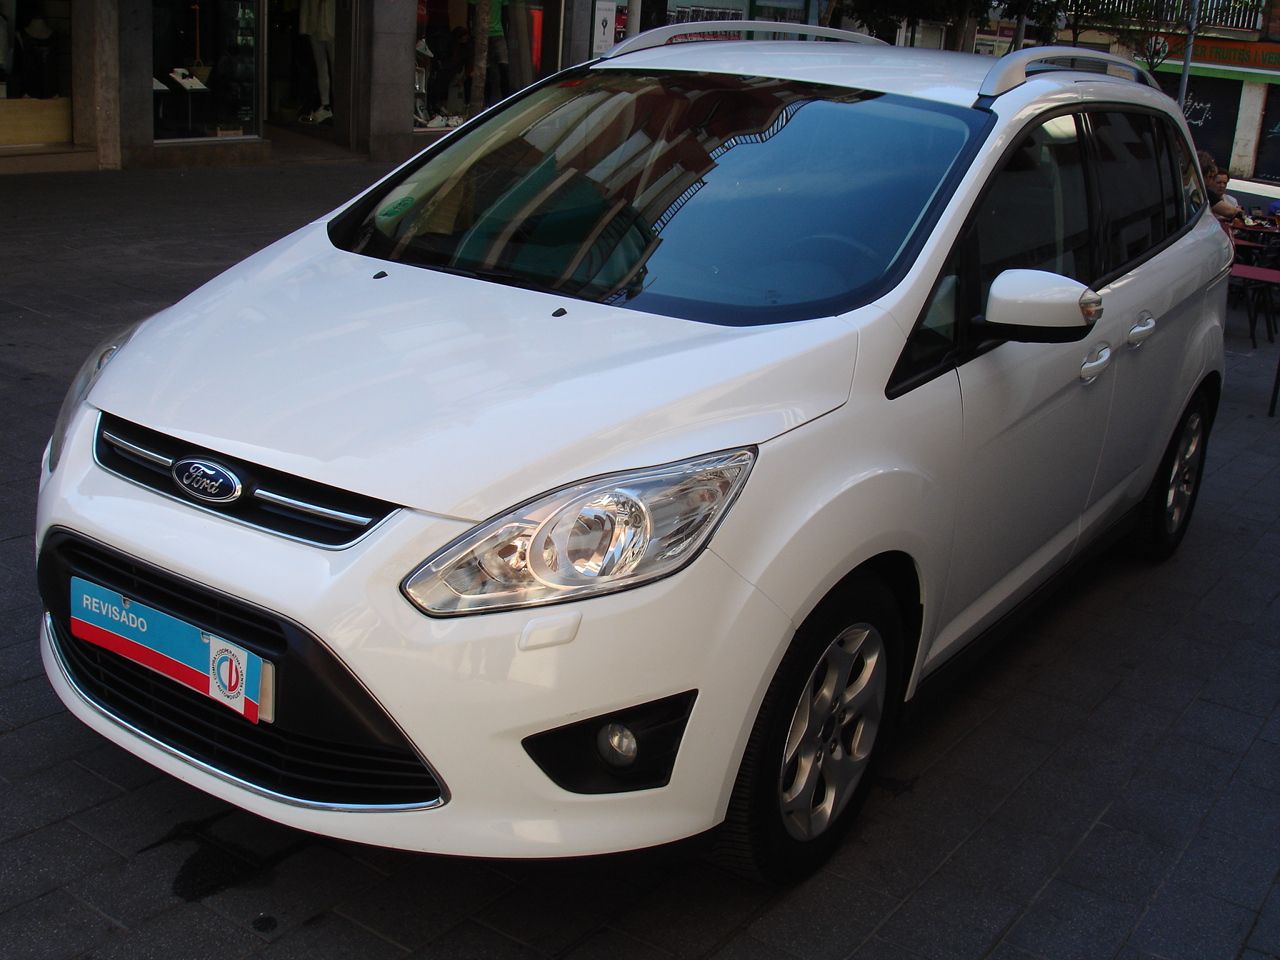 Ford Grand C-MAX 1.0 ECOBOOST Mod. AMBIENTE 7 plazas   - Foto 1